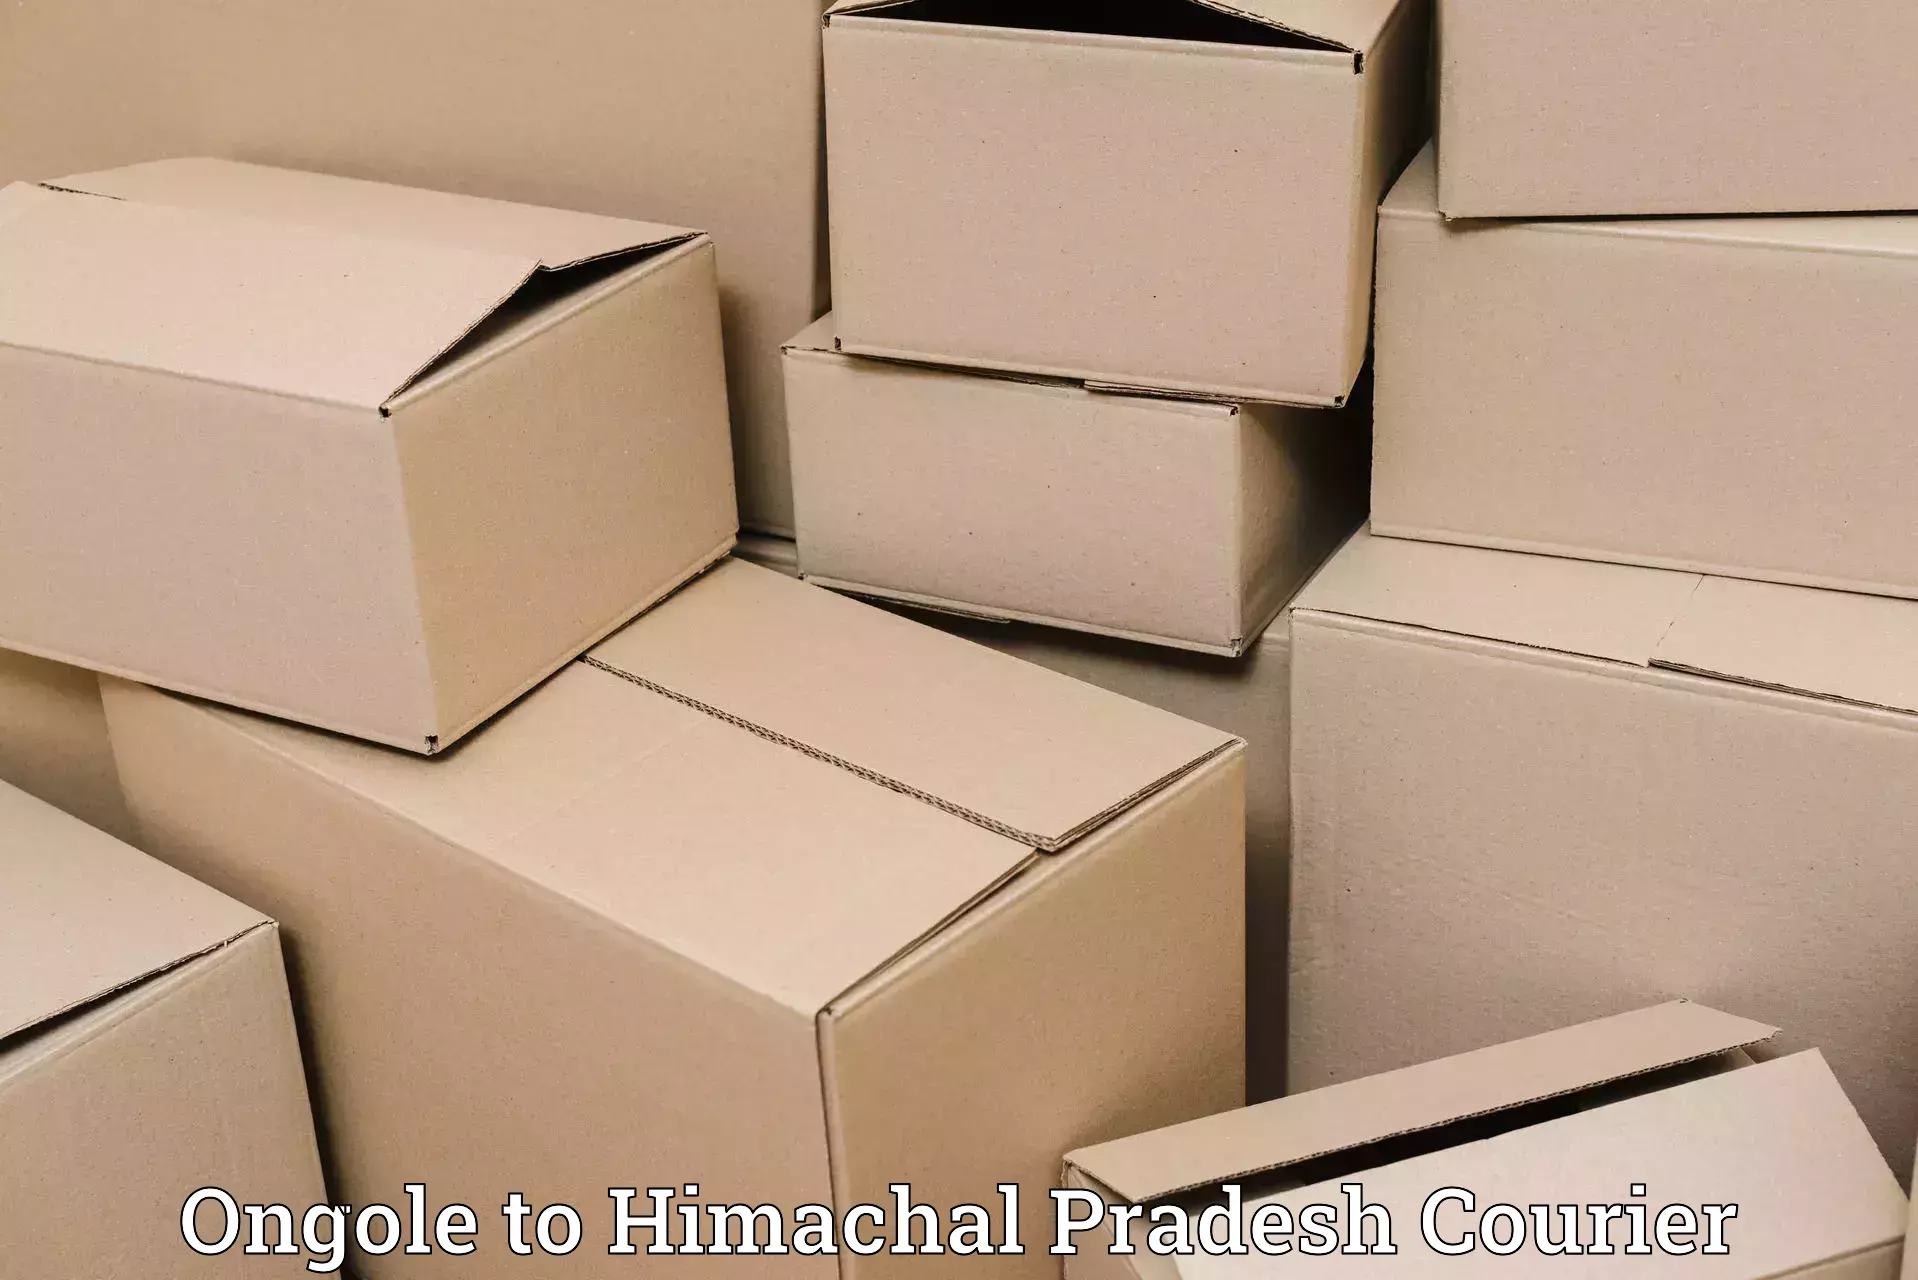 Customized shipping options Ongole to Nahan